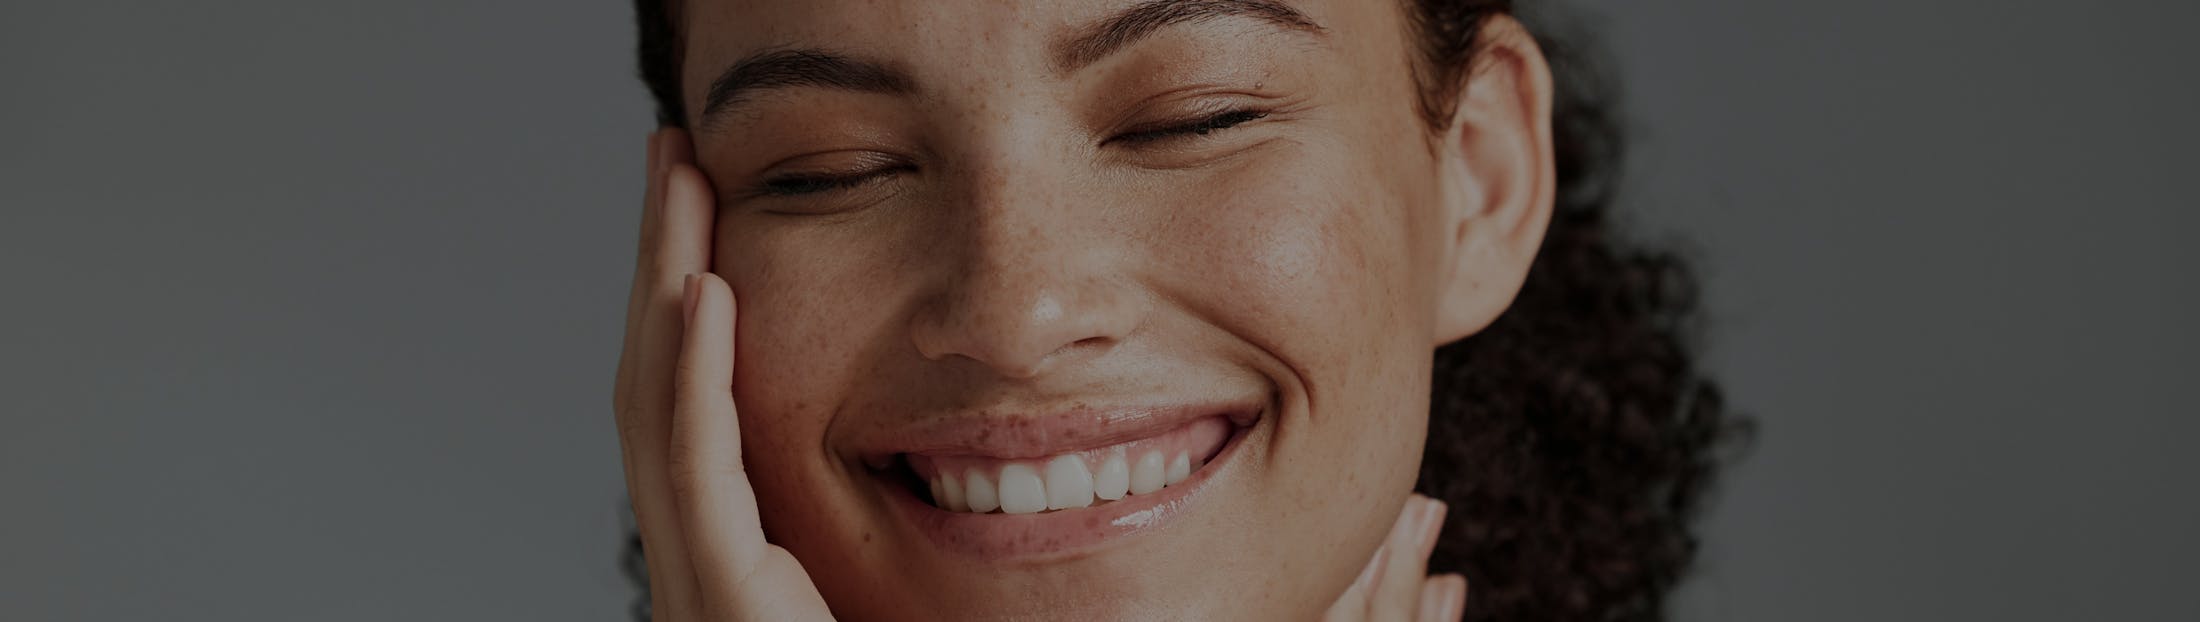 close up on woman smiling